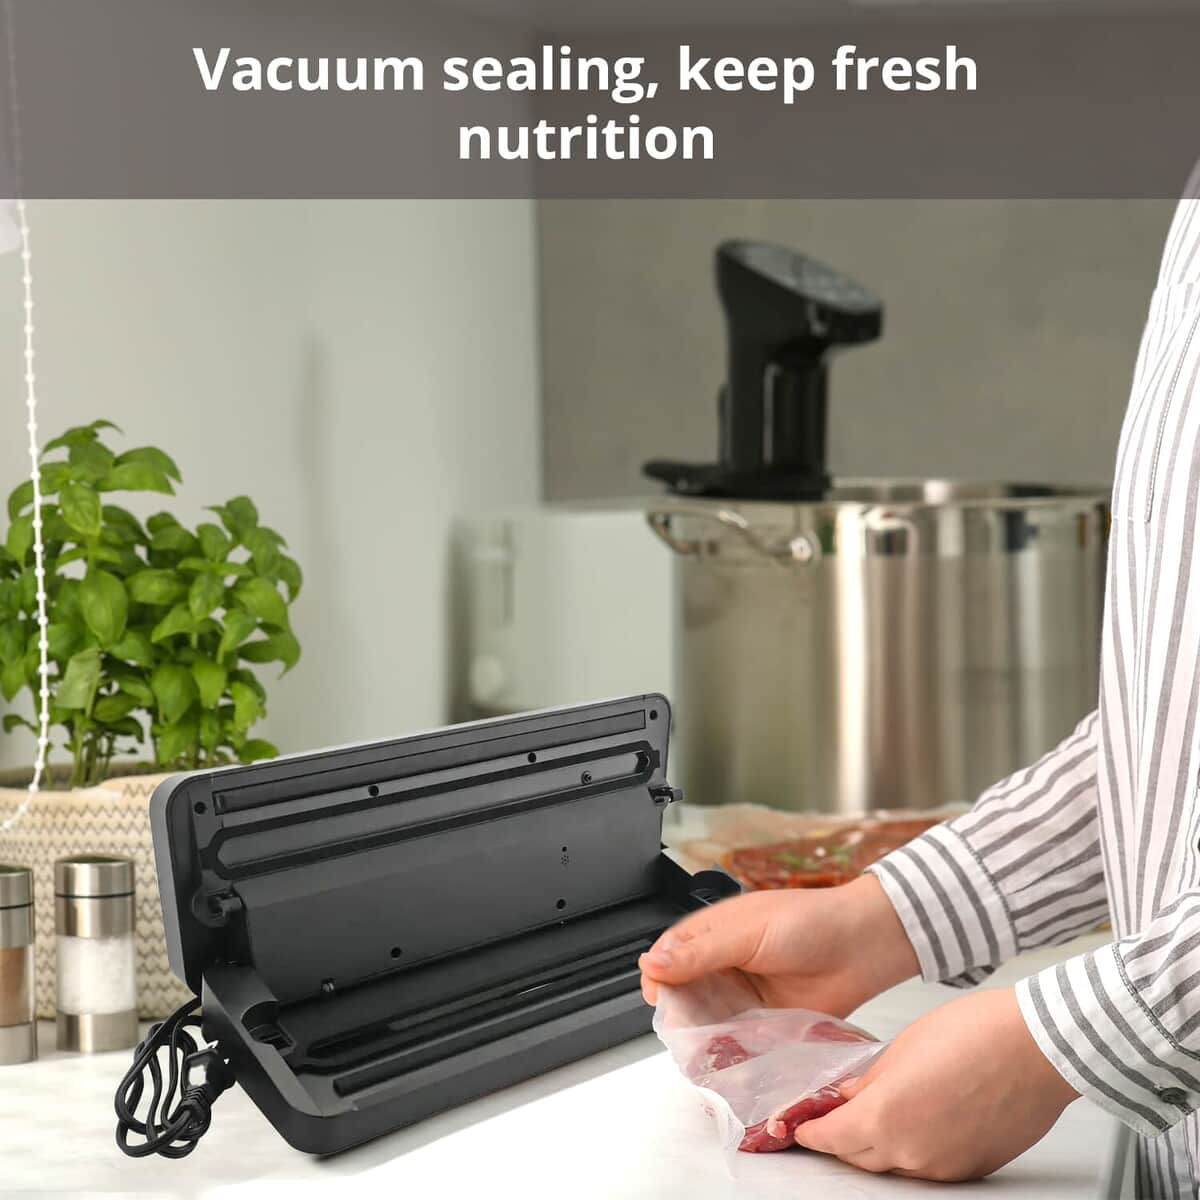 Cormify Black Vacuum Sealer System e9000-m, Compact Design Vacuum Sealing Machine For Automatic Food Sealer image number 3